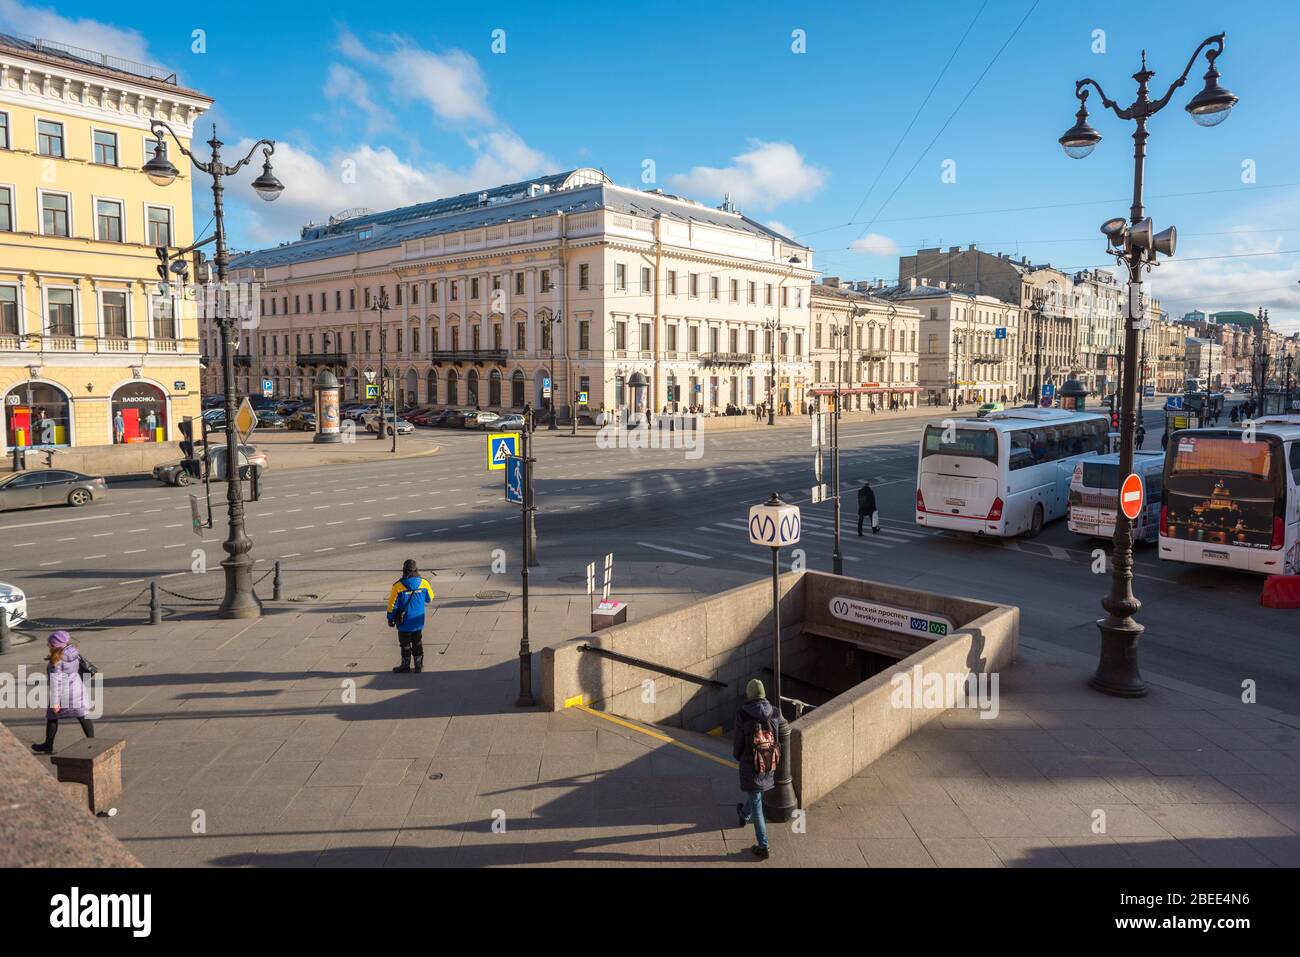 Saint Petersburg, Russia - February 27, 2020: Nevsky Prospect and an exit of Nevsky Prospekt metro station at the intersection with Dumskaya Street. Stock Photo